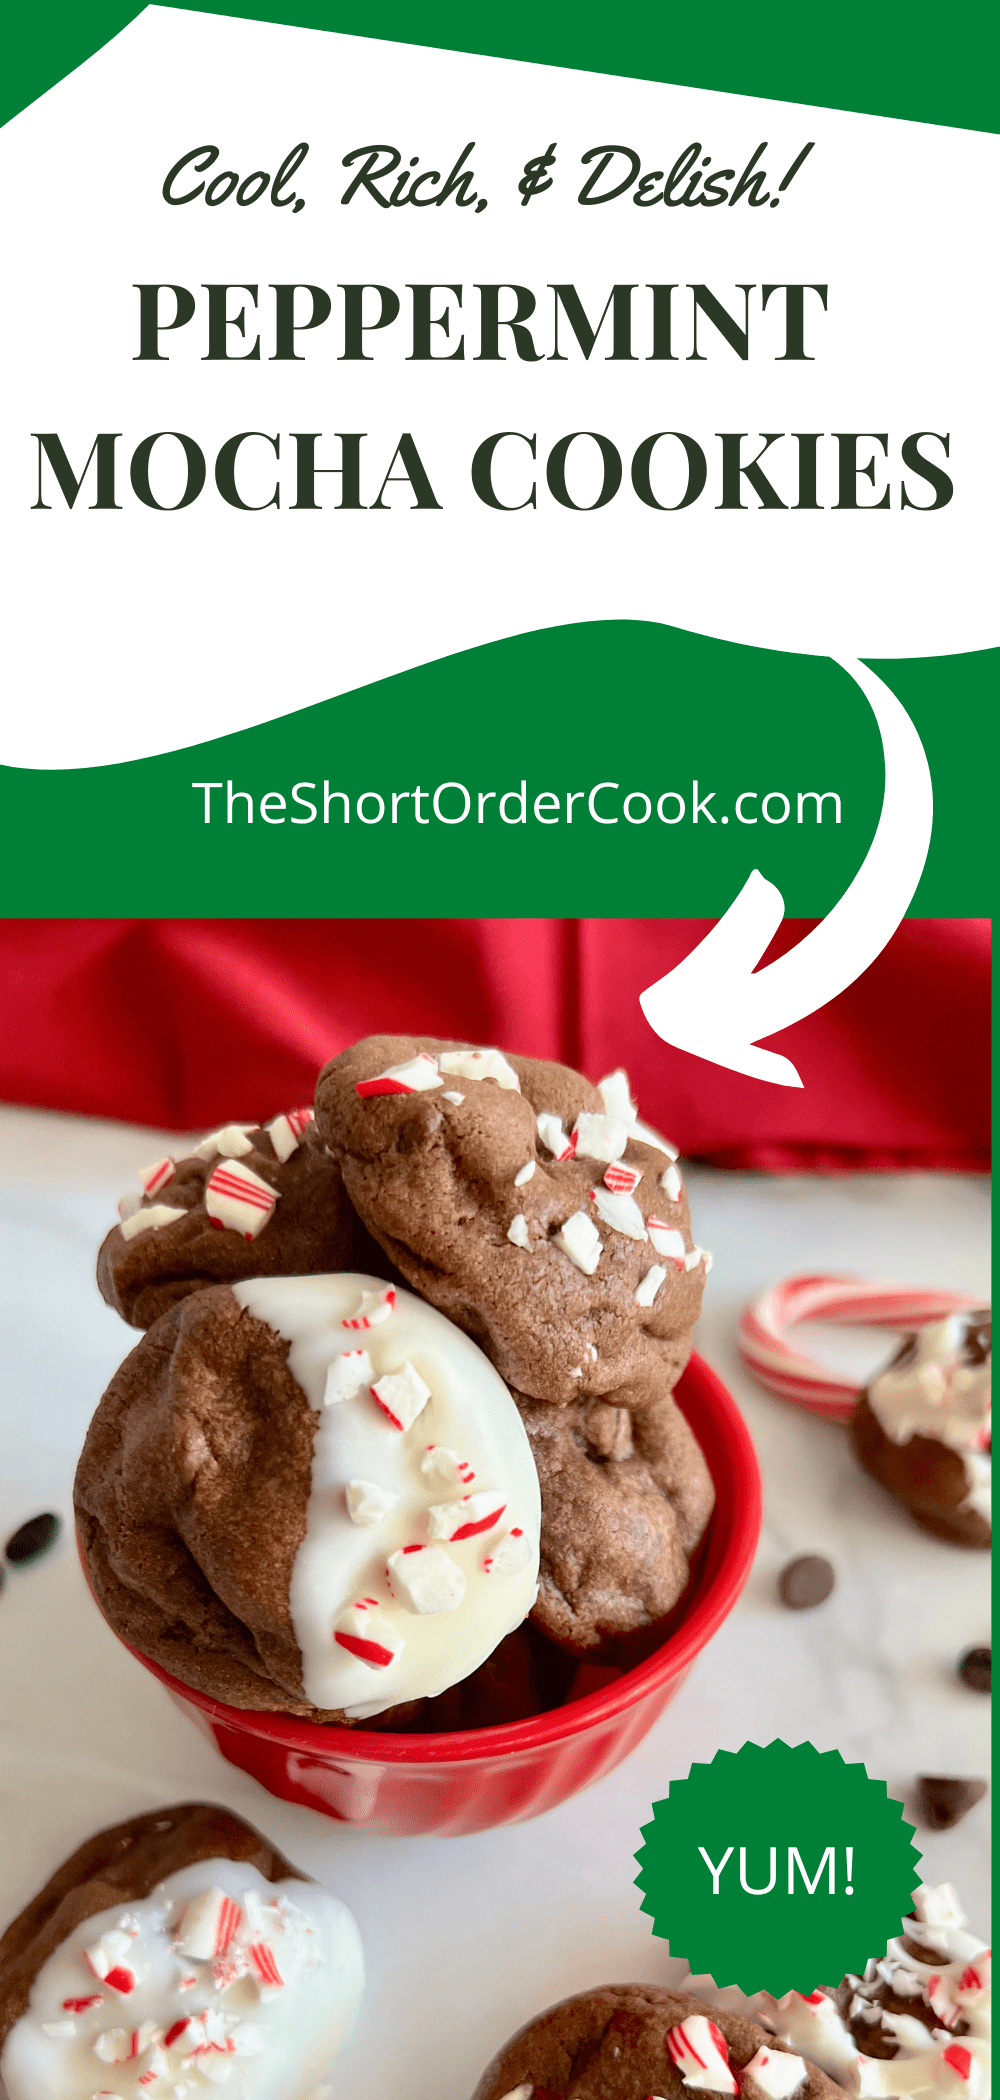 Peppermint Mocha Cookies ready to eat.